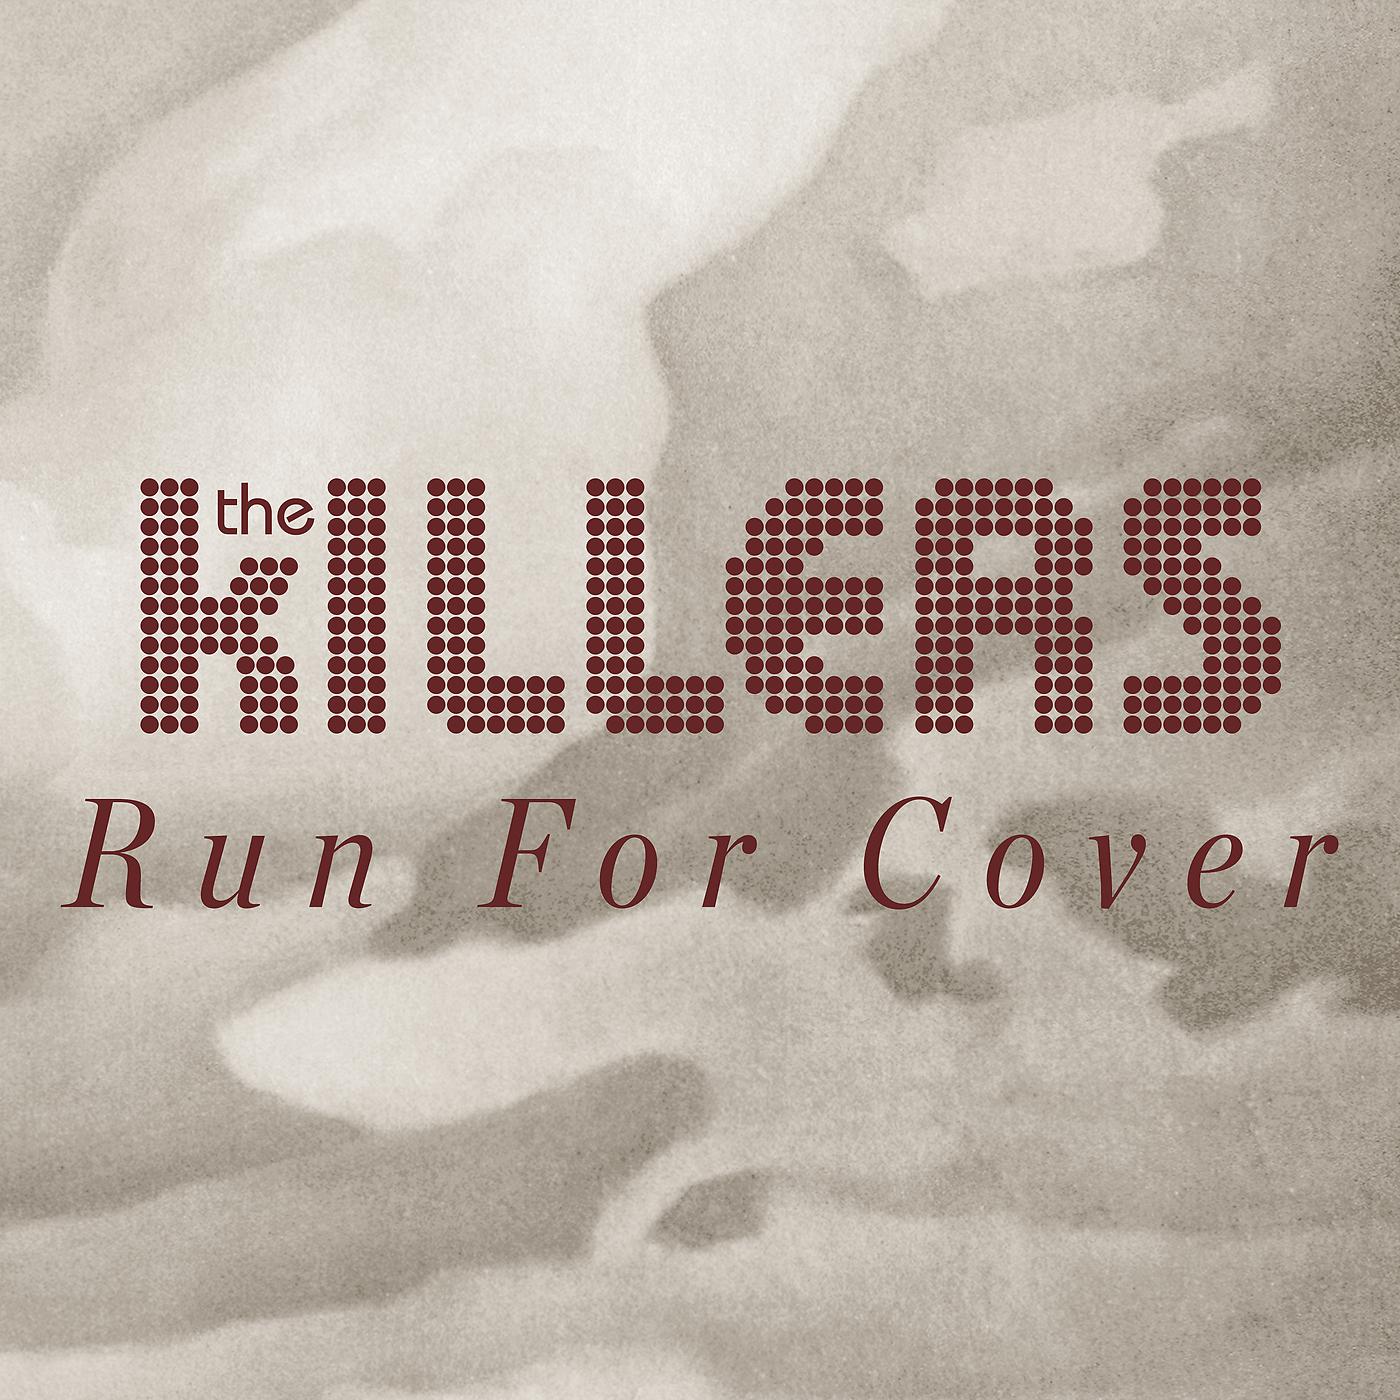 Killers обложка. Run for Cover the Killers. The Killers обложка. The Killers альбомы. The Killers 2020.